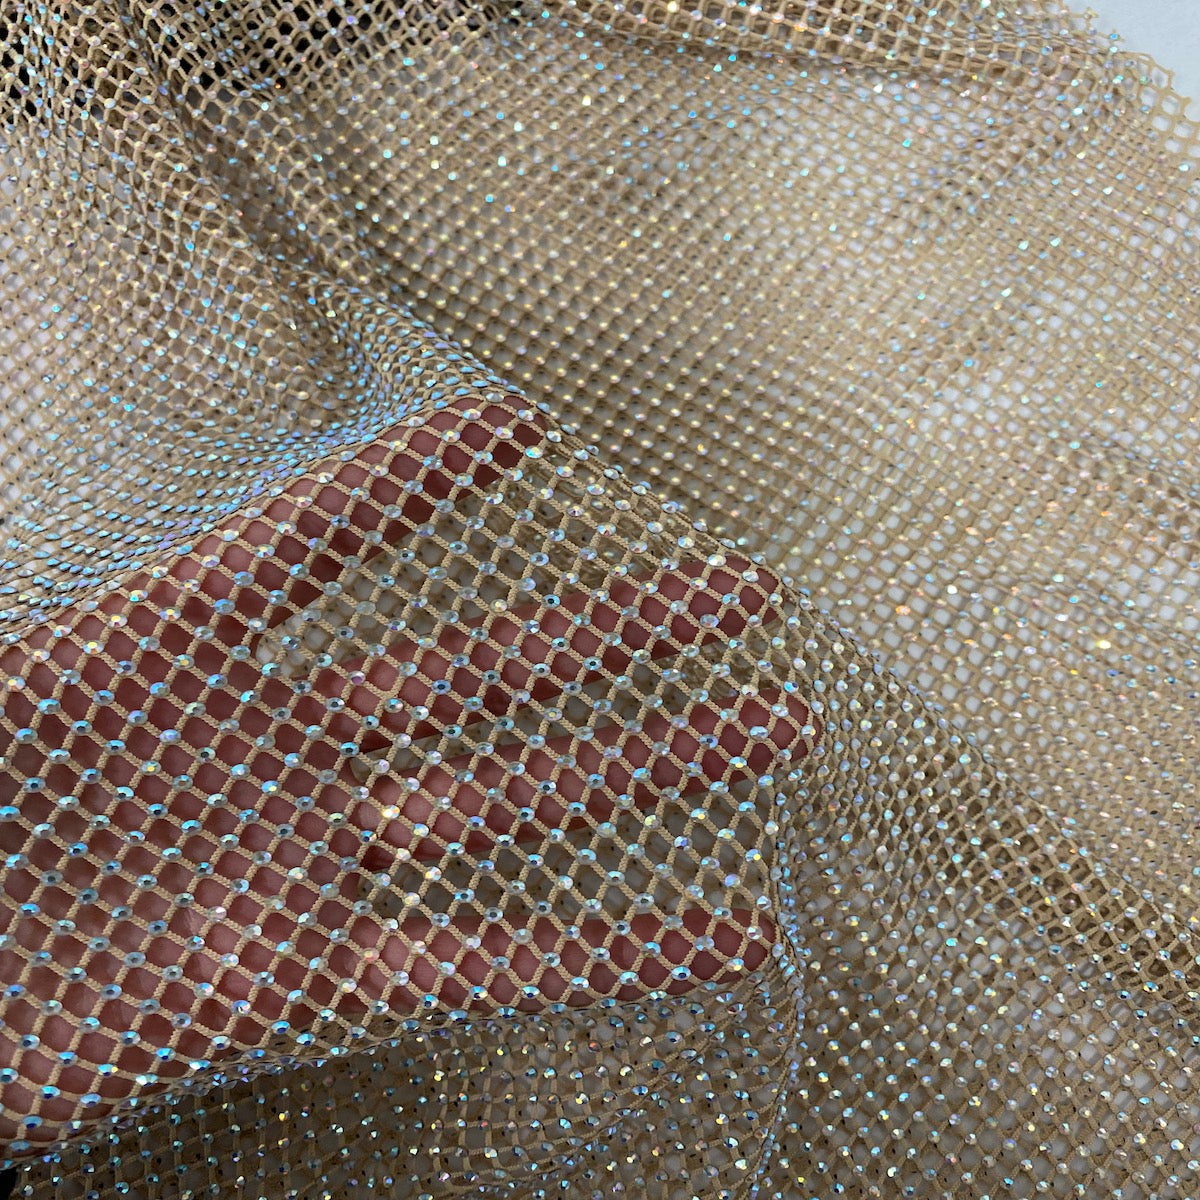 Chicken Wire Net for Craft Projects,3 Sheets Algeria